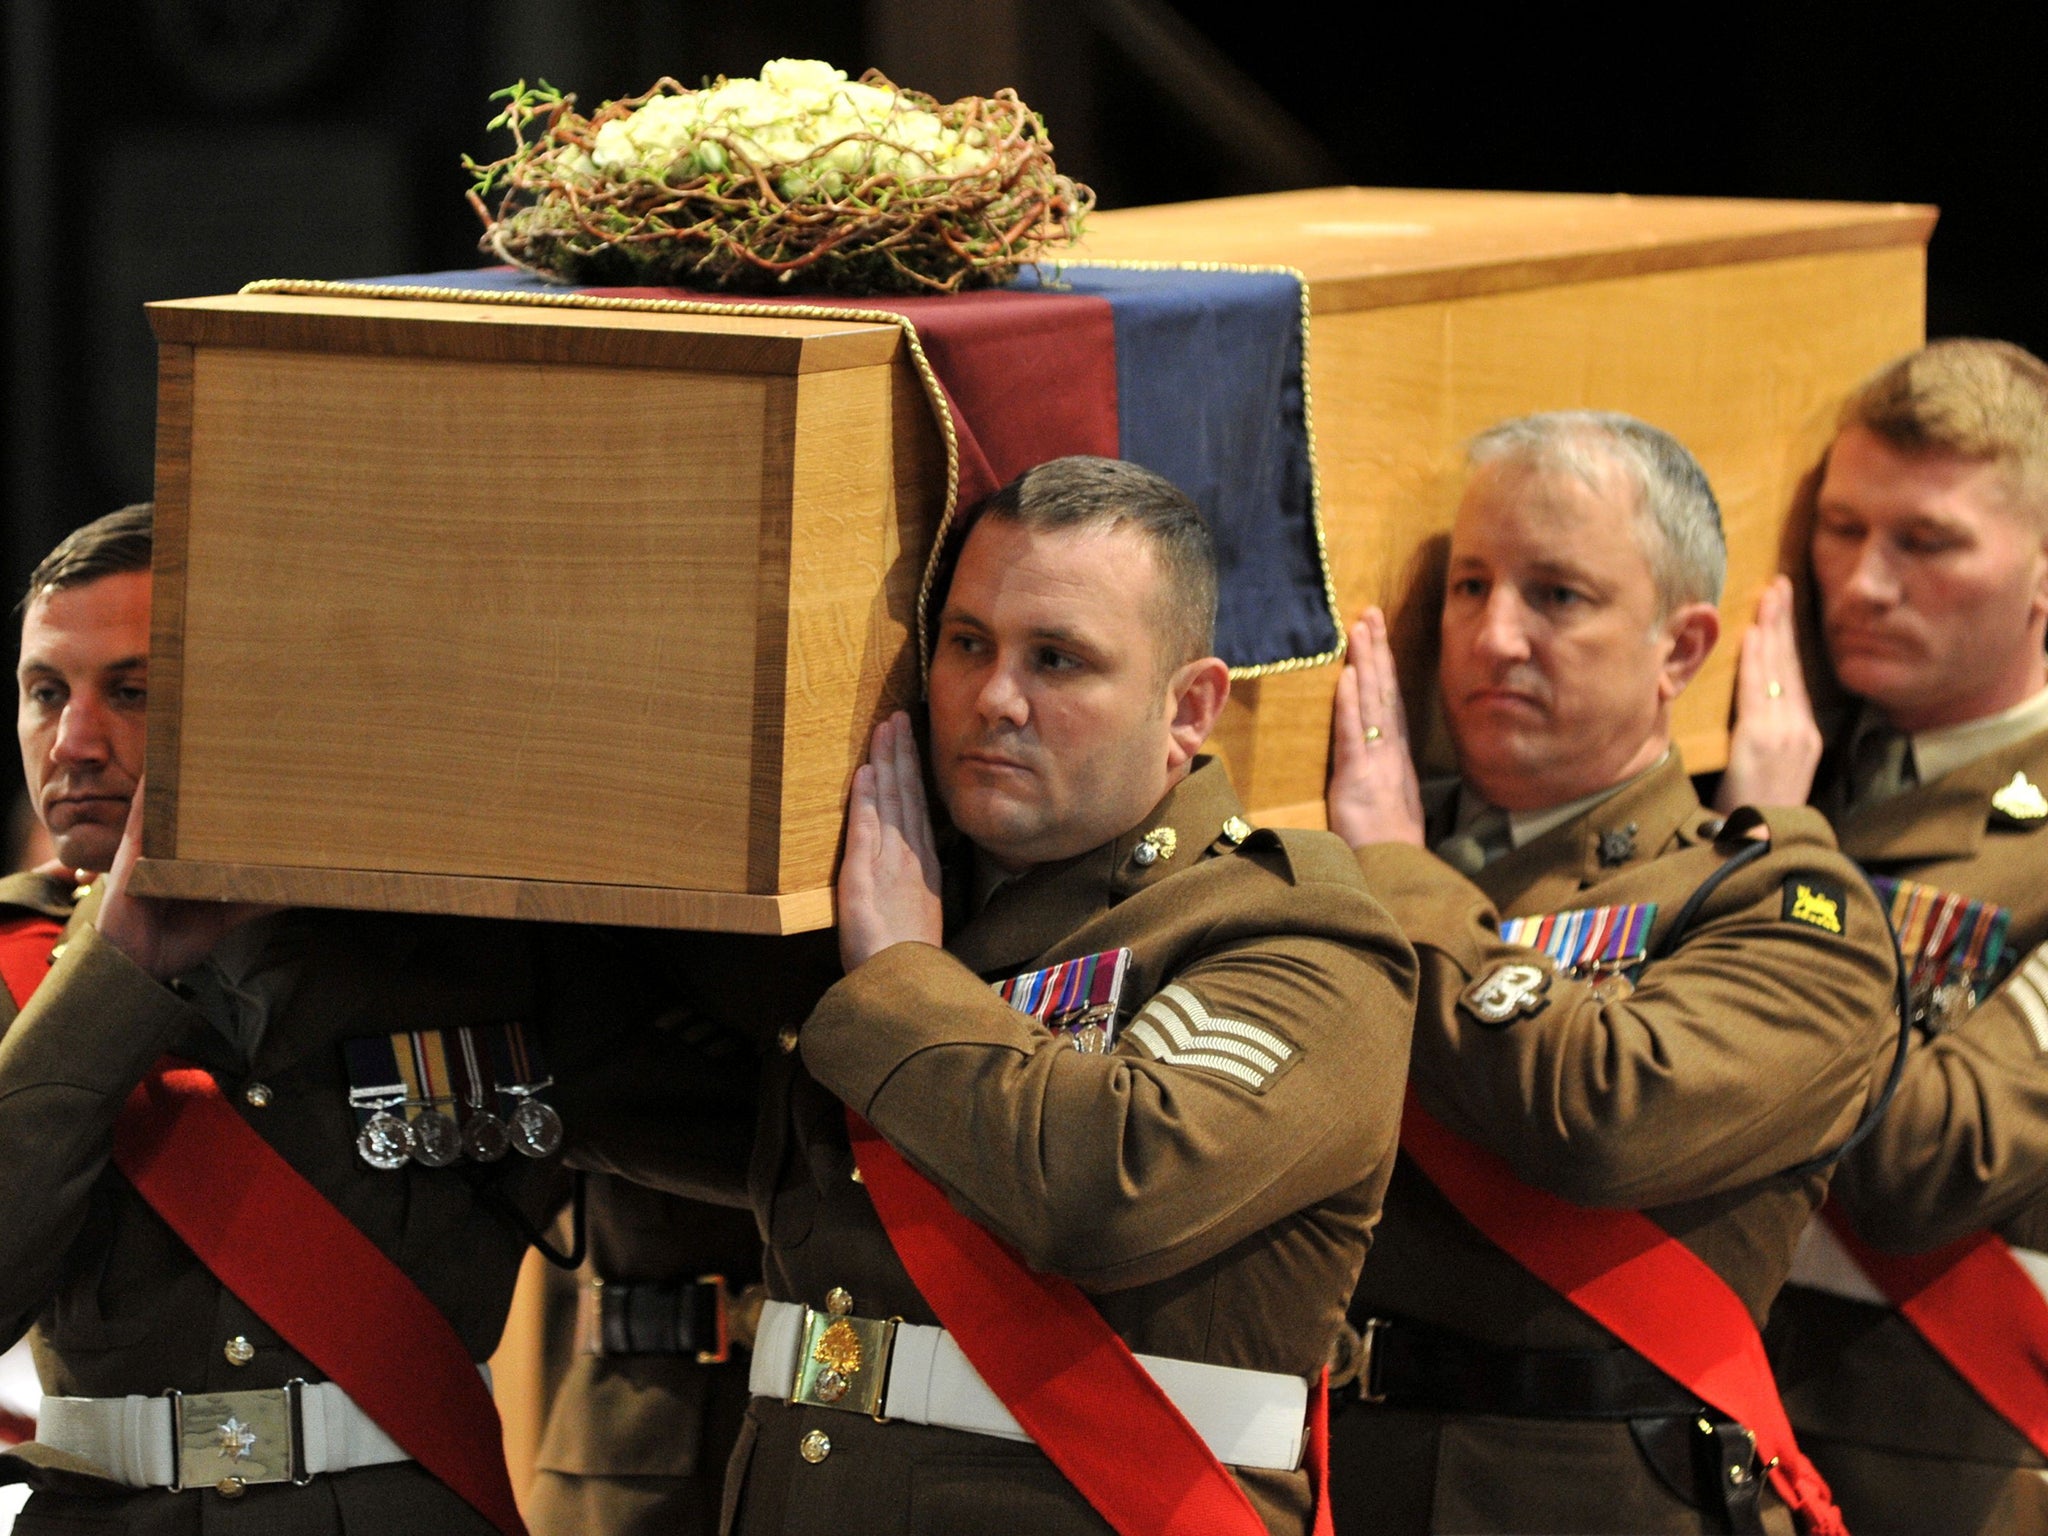 The coffin is carried by the military bearer party during the service for the re-burial of Richard III